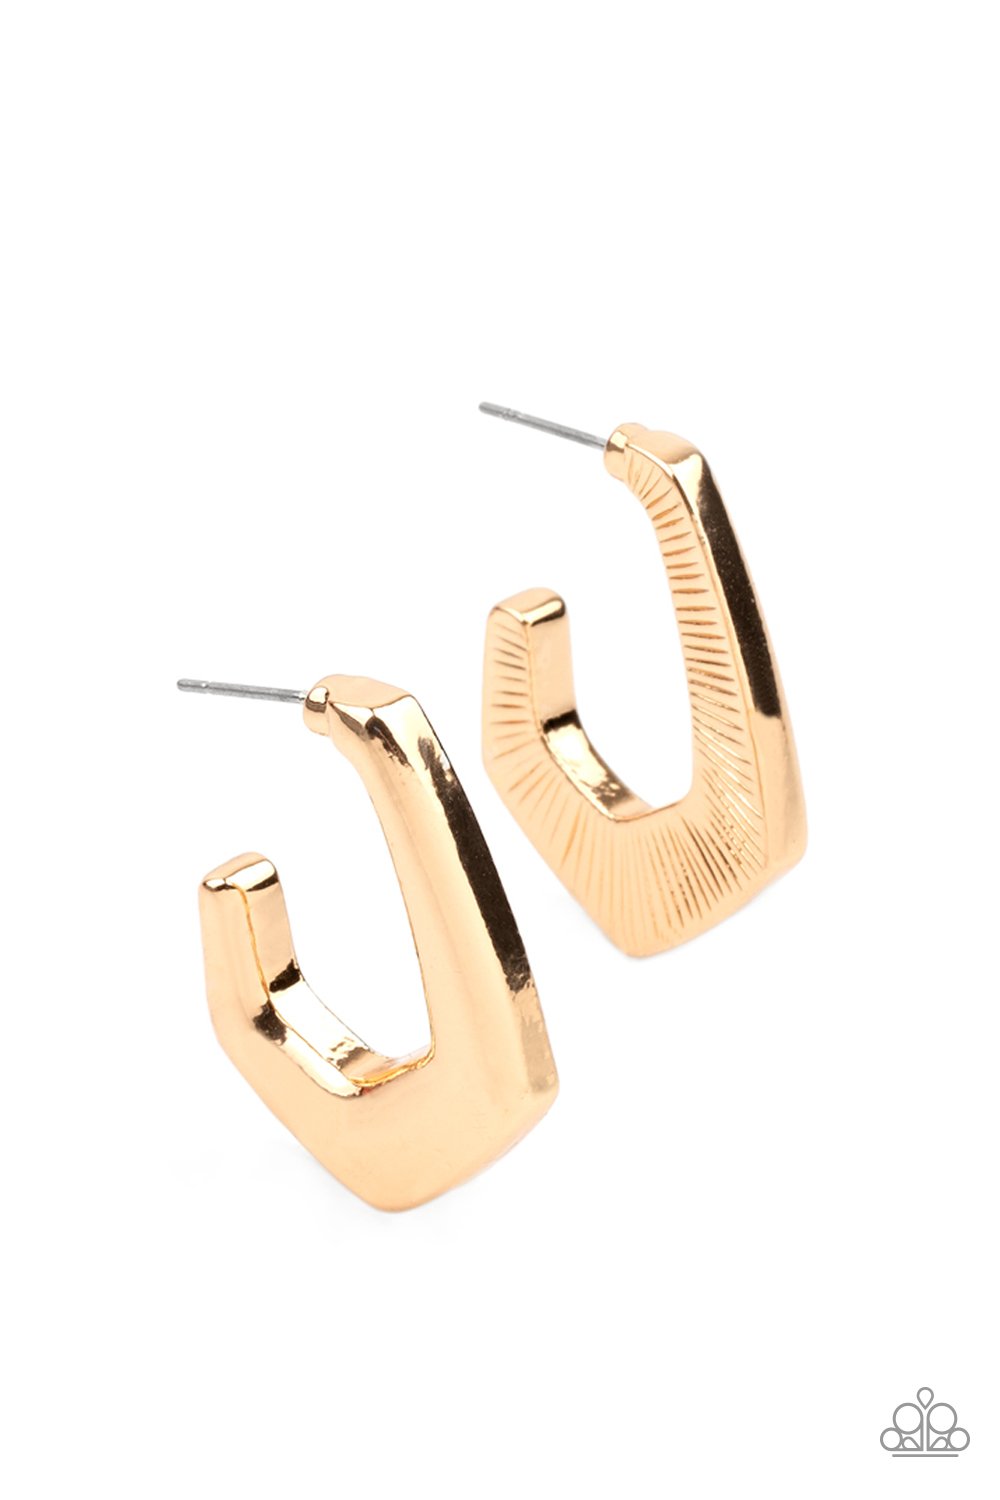 &lt;p&gt;A glistening gold bar curves into a hook shaped hoop, creating an edgy fashion. Earring attaches to a standard post fitting. Hoop measures approximately 3/4\&quot; in diameter.
 &lt;/p&gt;  

&lt;p&gt; &lt;i&gt;  Sold as one pair of hoop earrings. &lt;/i&gt;  &lt;/p&gt;


&lt;img src=\&quot;https://d9b54x484lq62.cloudfront.net/paparazzi/shopping/images/517_tag150x115_1.png\&quot; alt=\&quot;New Kit\&quot; align=\&quot;middle\&quot; height=\&quot;50\&quot; width=\&quot;50\&quot;&gt;